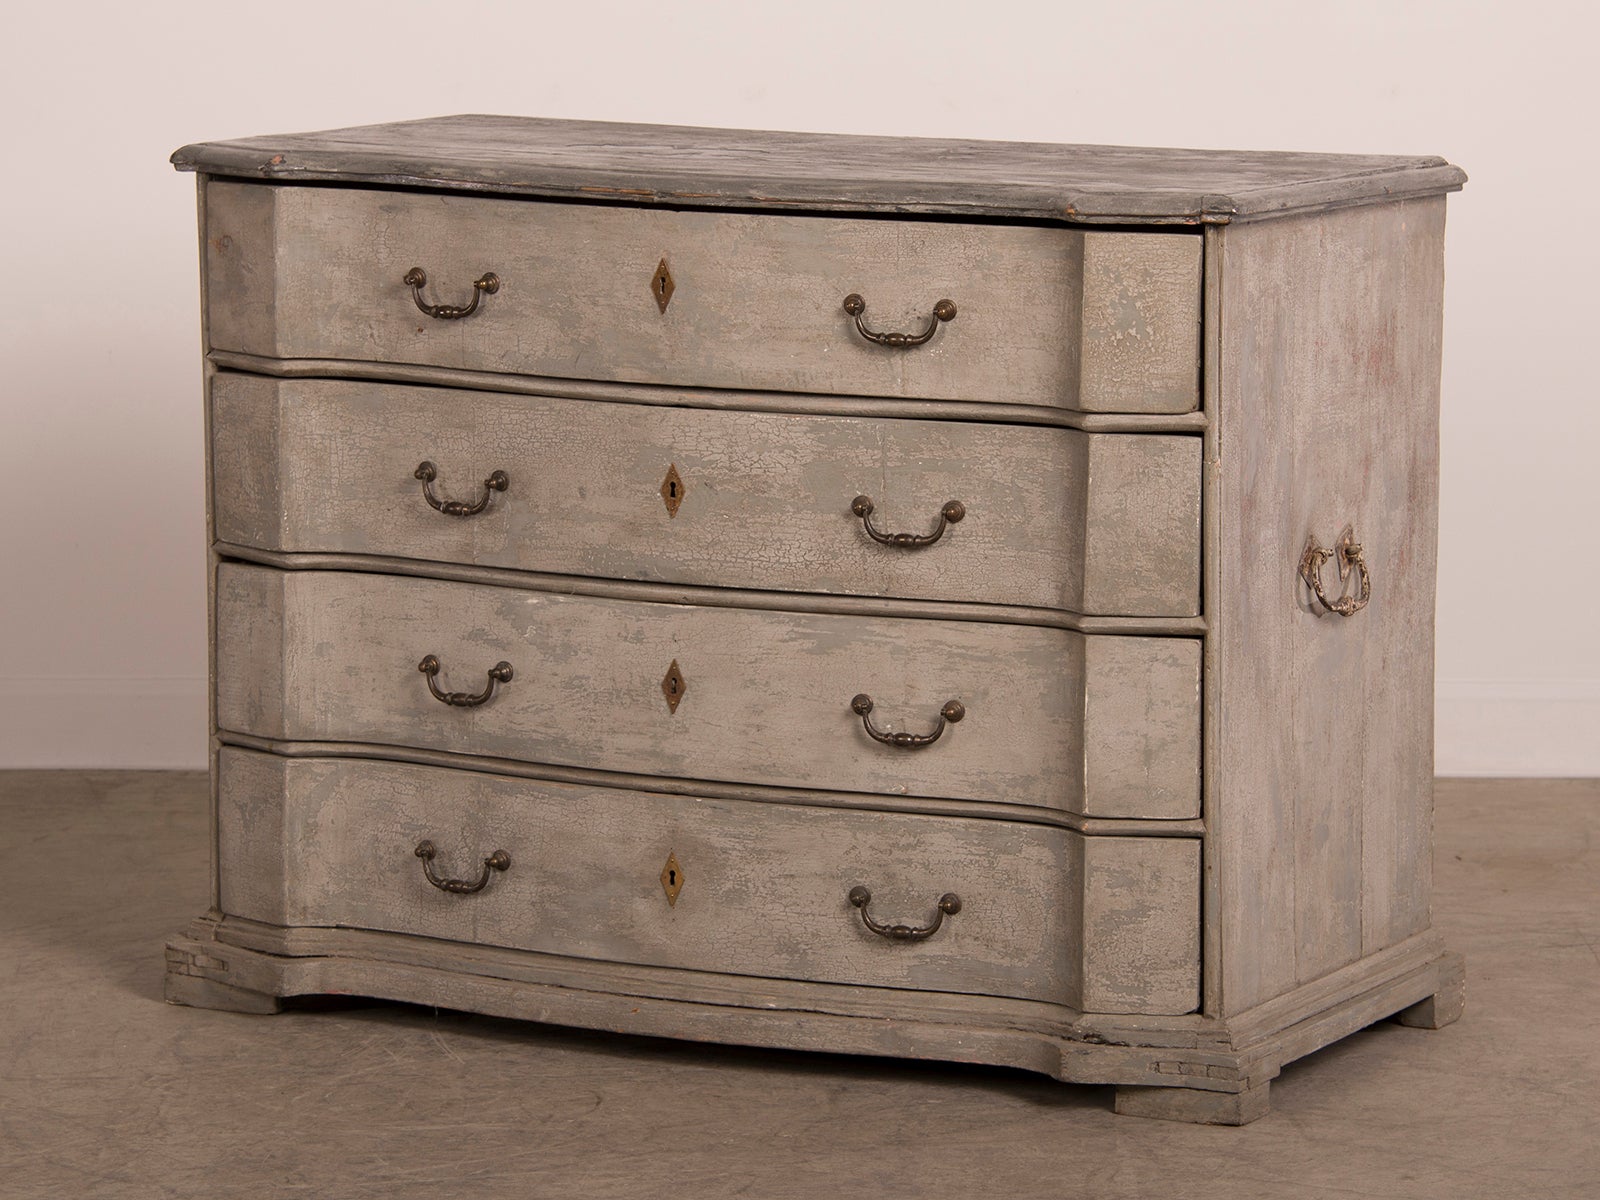 Antique Swedish Baroque Painted Chest of Drawers, circa 1760